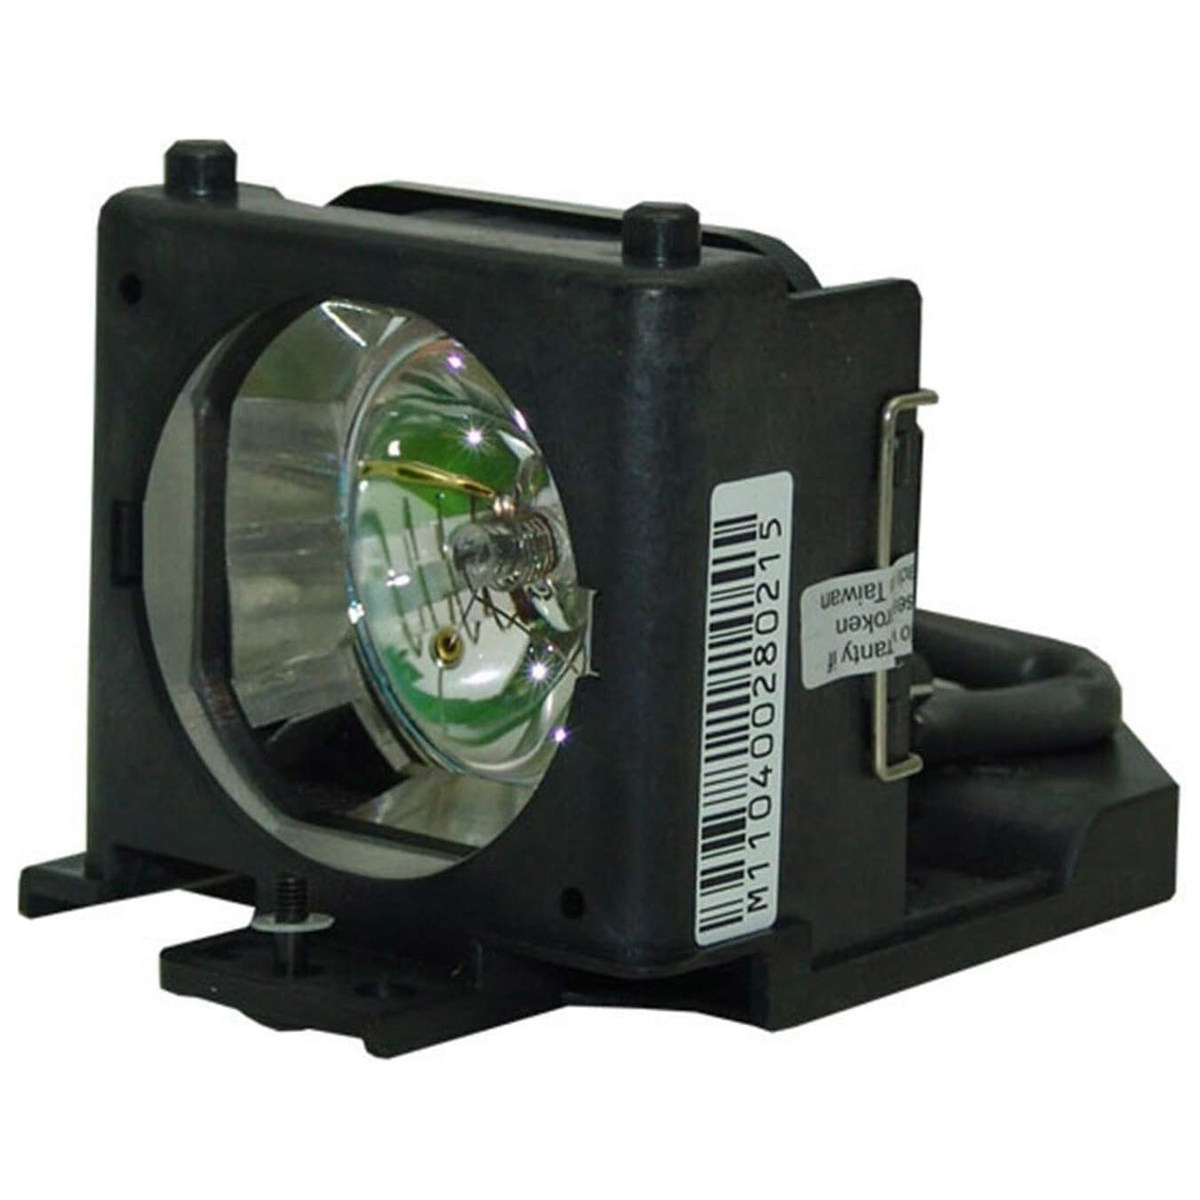 Replacement Projector lamp DT00701 For Hitachi CP-RS55 CP-RS56 CP-RS56+ CP-RS57